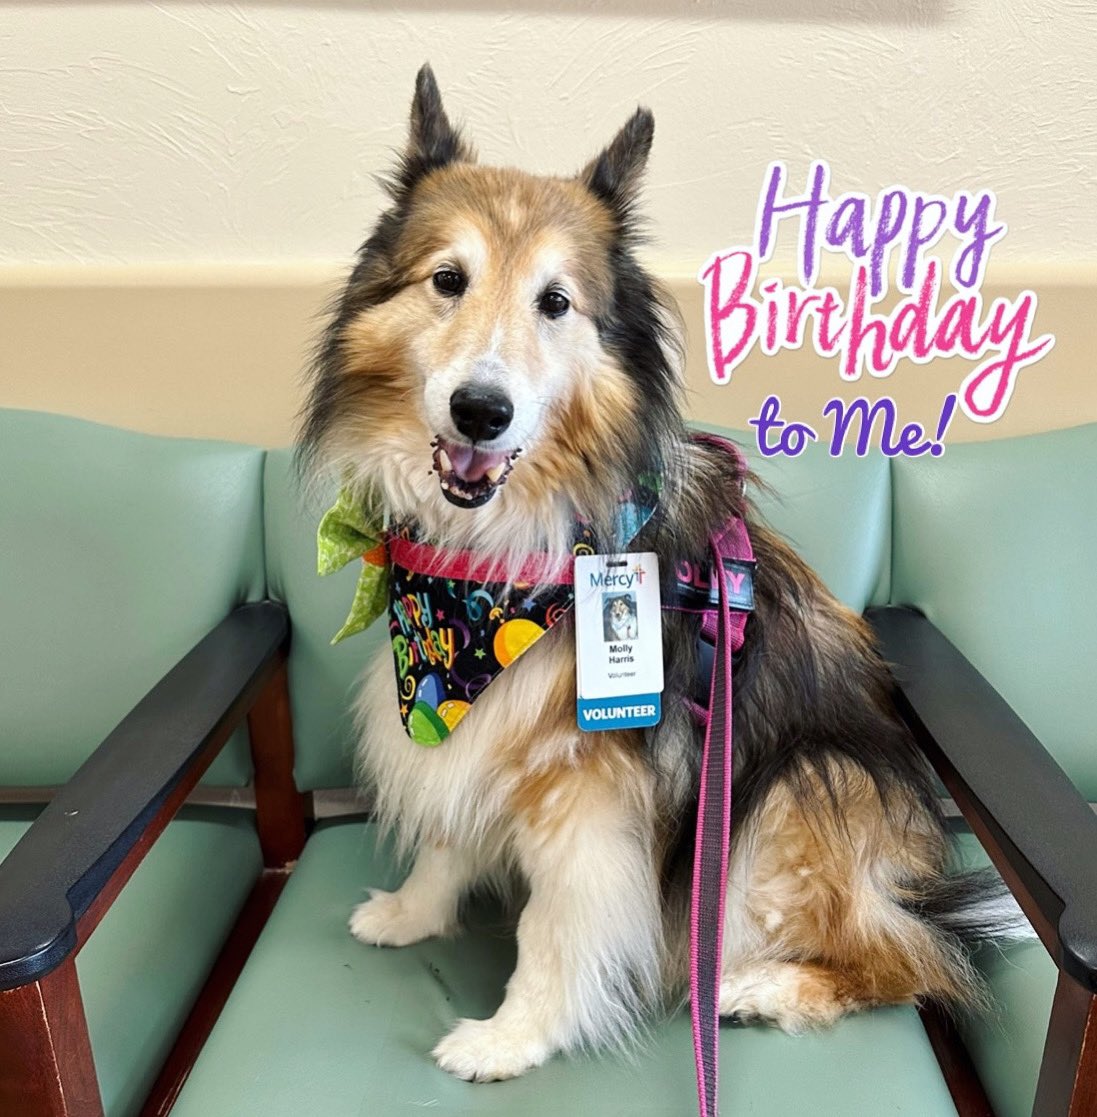 ```Happy birthday to ME! I’m 11 years old today! Celebrating at my favorite hospital. Think I deserve extra treats? #mollygirltherapydog```